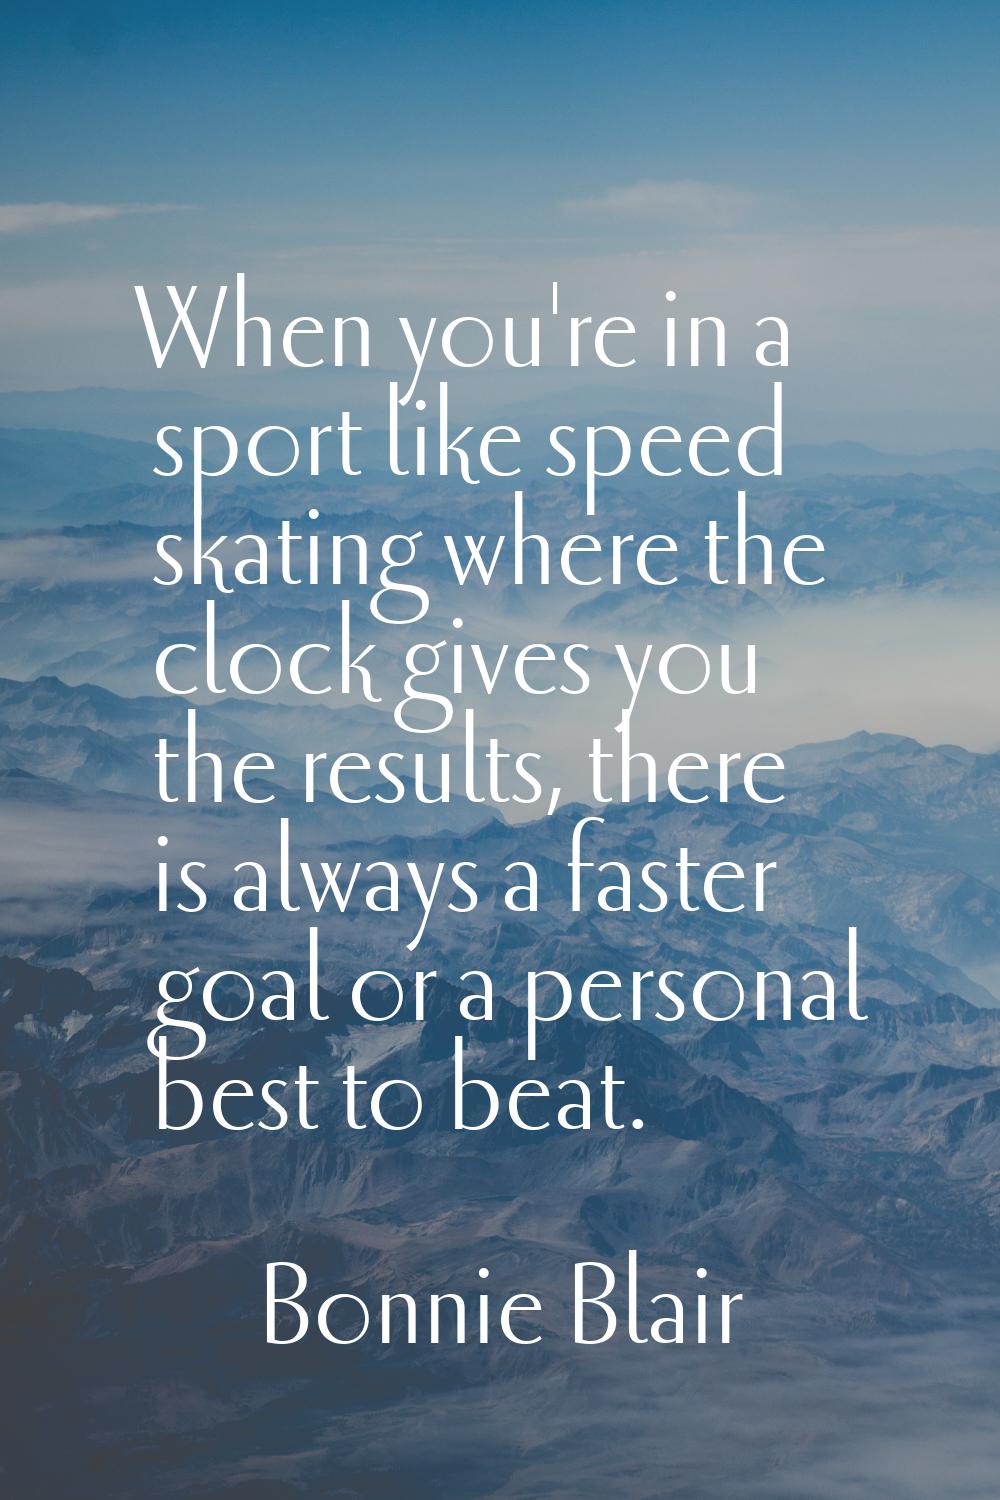 When you're in a sport like speed skating where the clock gives you the results, there is always a 